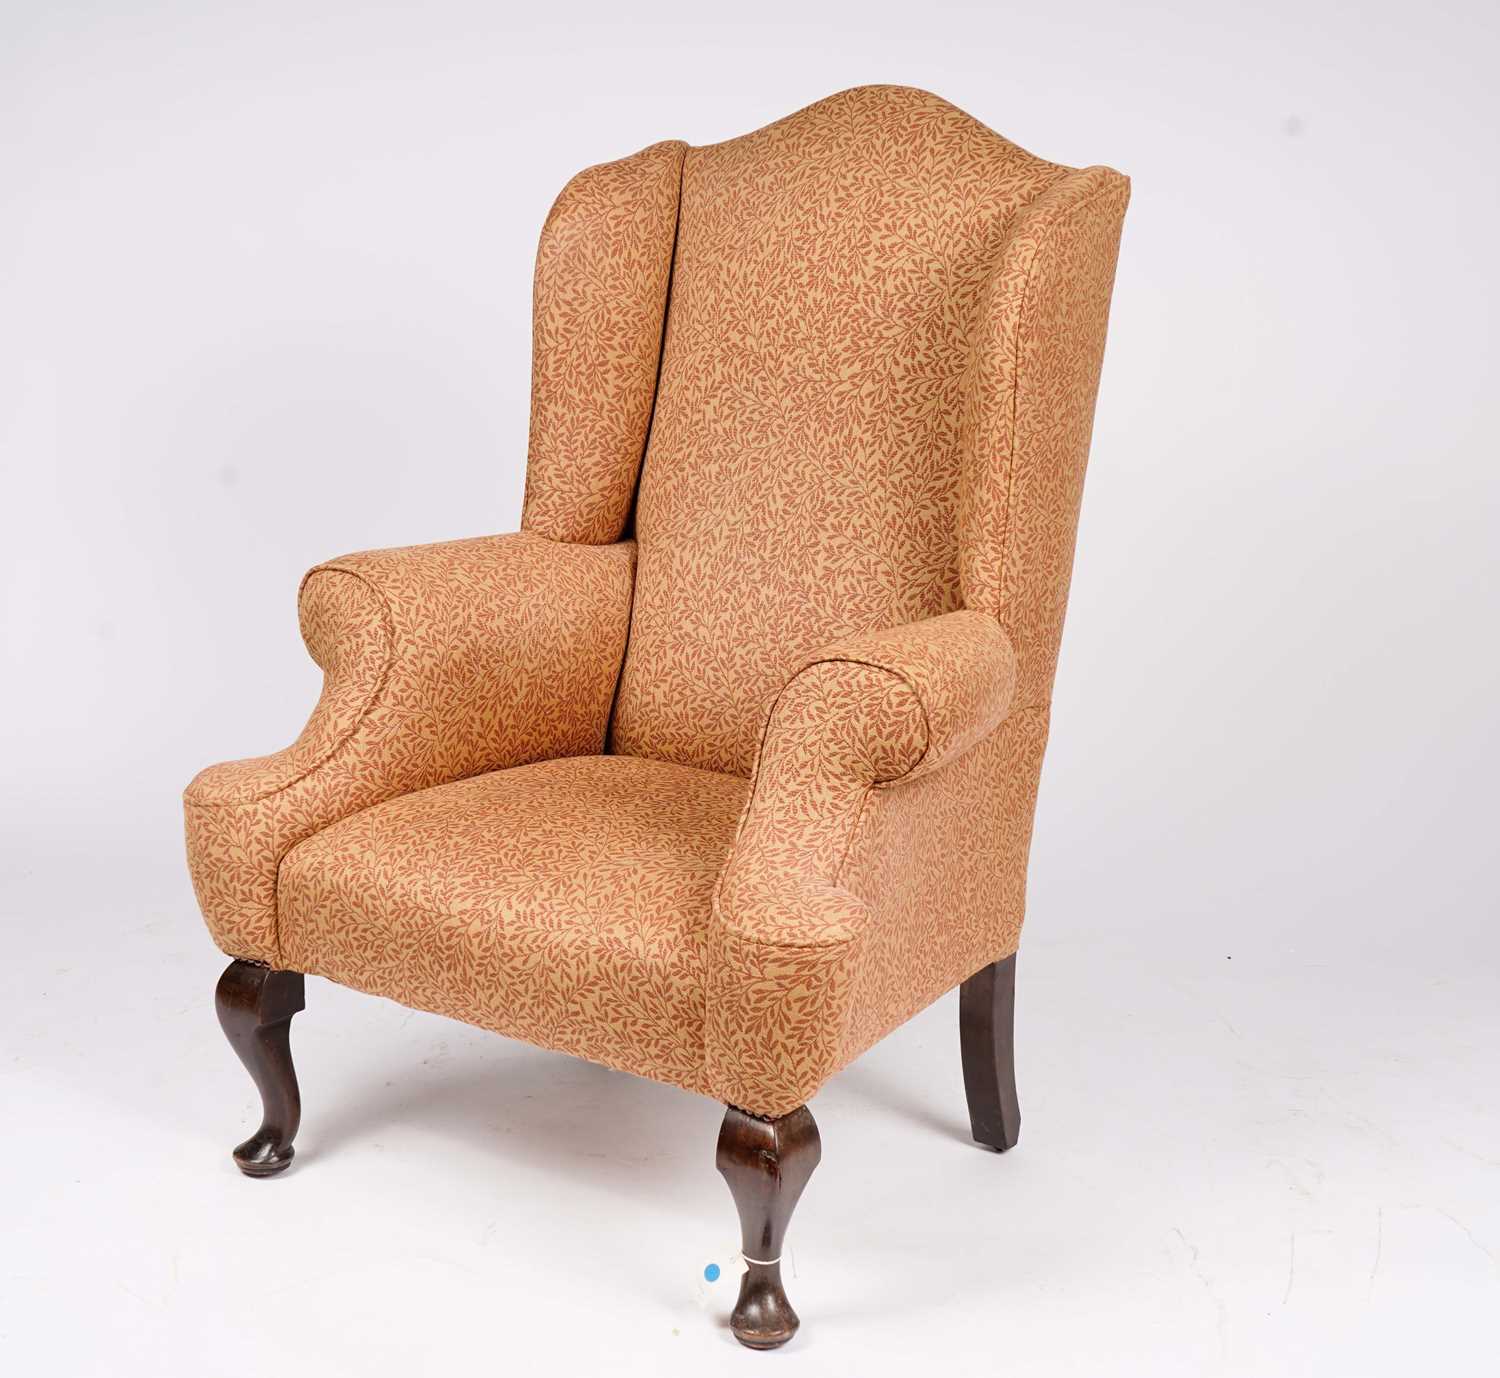 A wingback armchair in the early 18th Century taste - Image 5 of 6